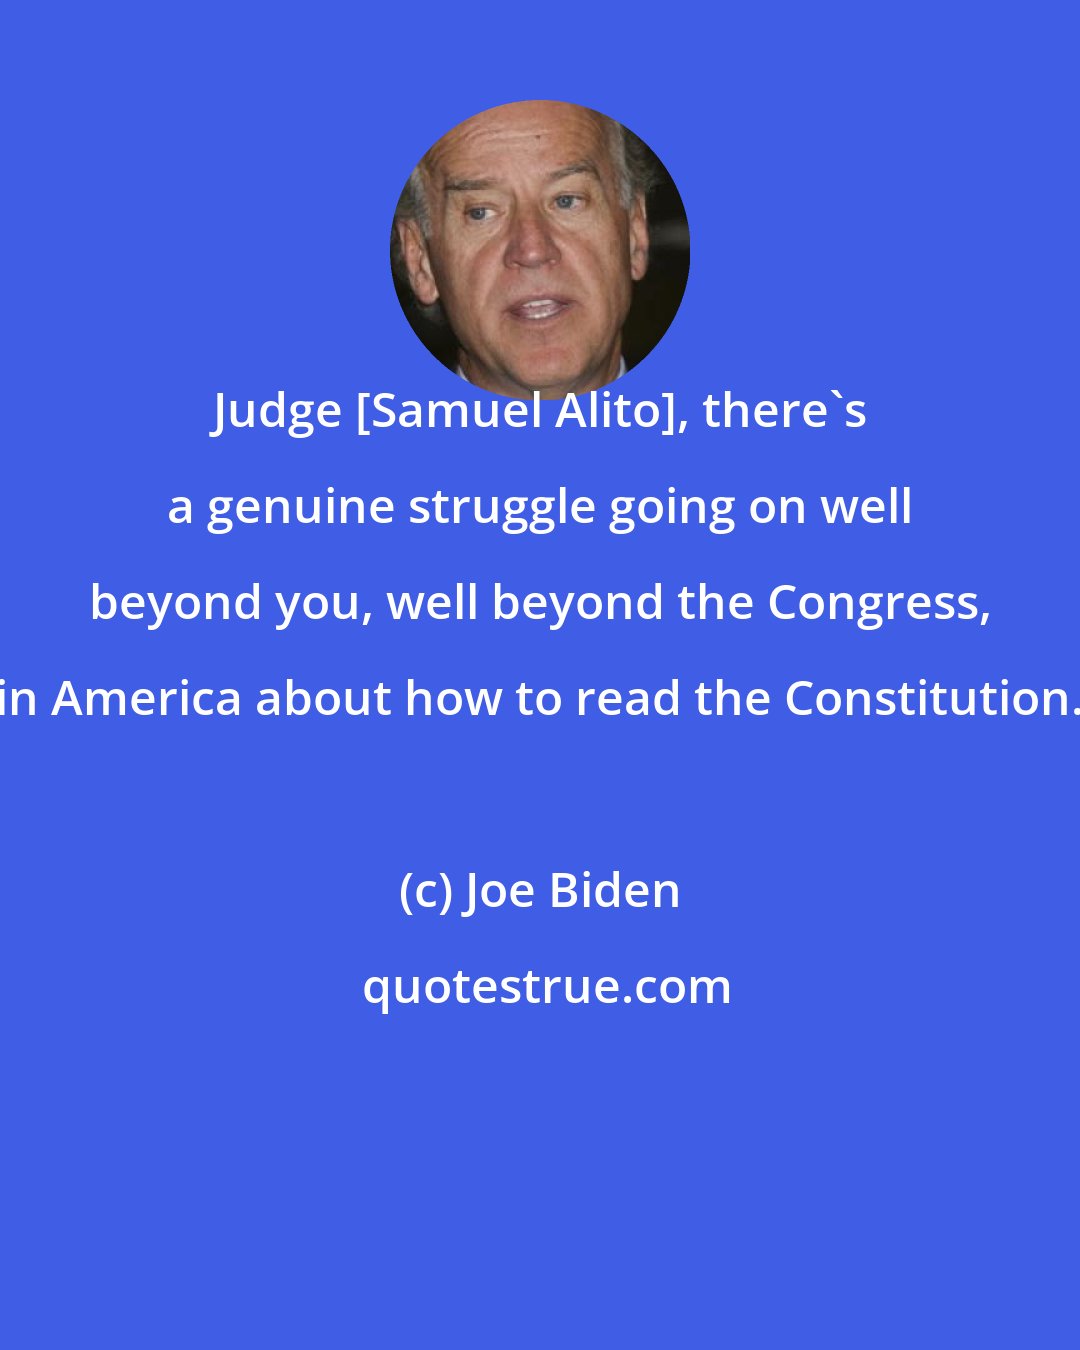 Joe Biden: Judge [Samuel Alito], there's a genuine struggle going on well beyond you, well beyond the Congress, in America about how to read the Constitution.